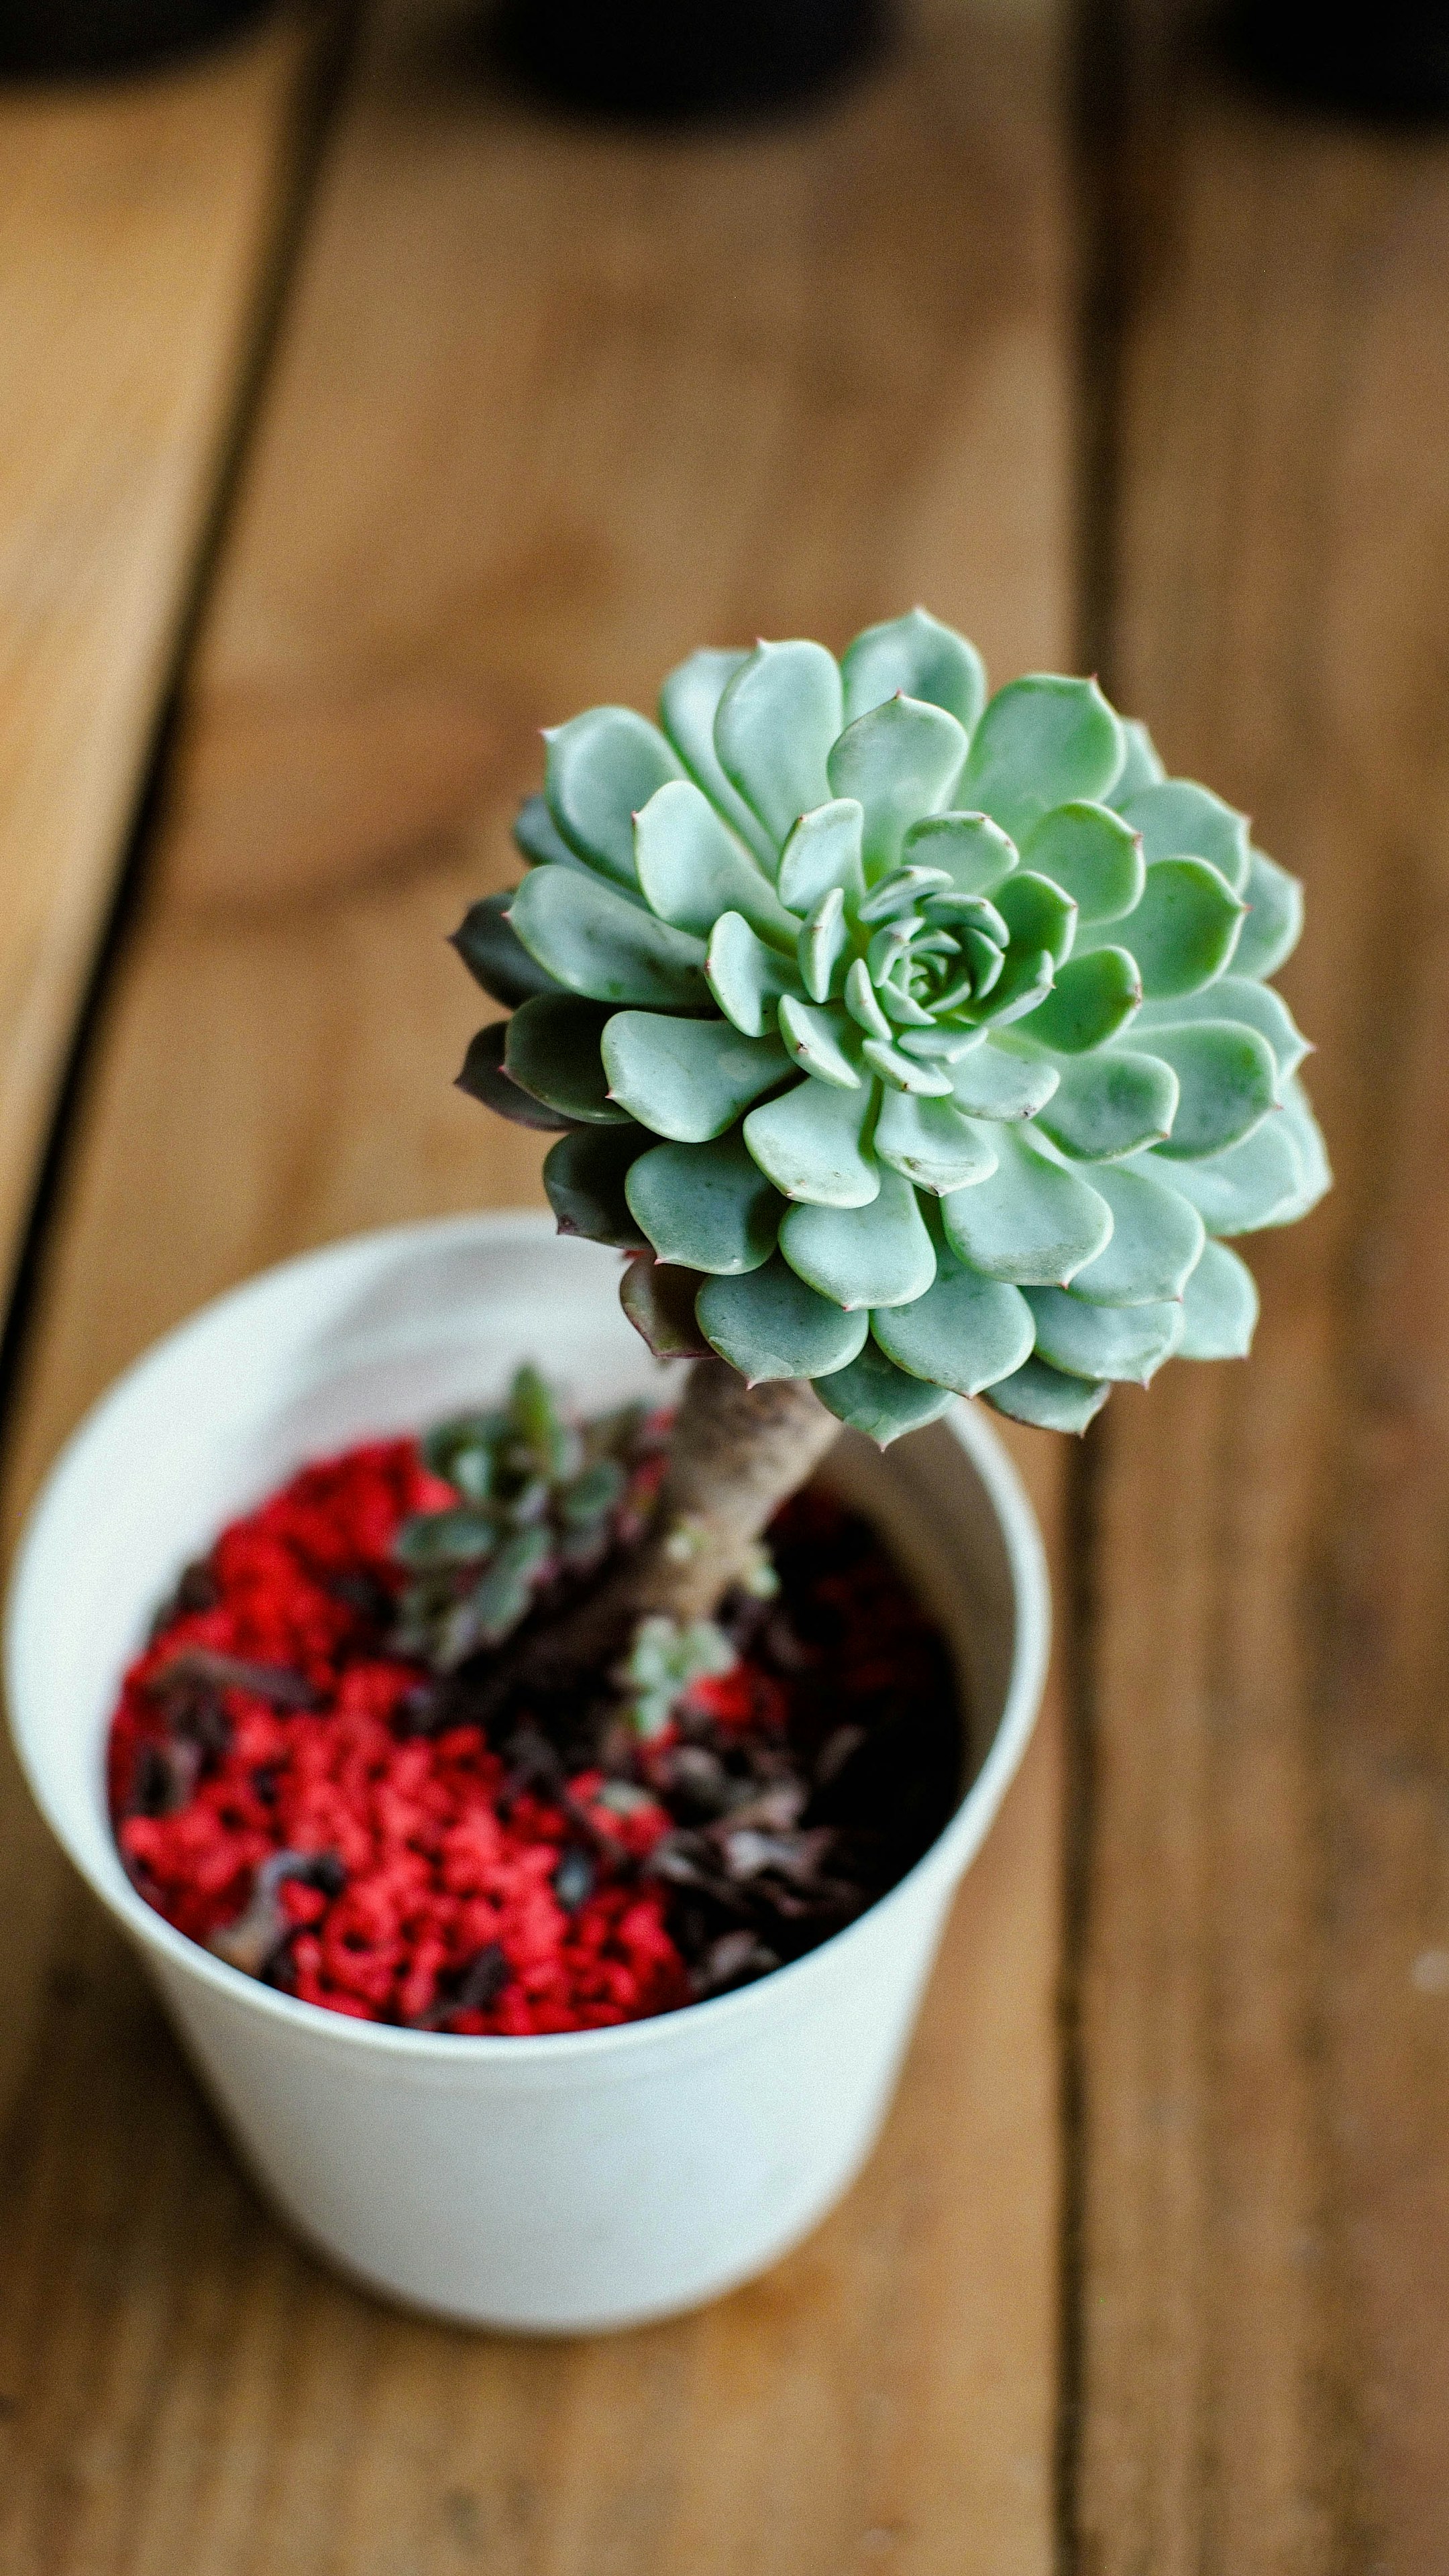 6 Useful Tips To Grow Succulents At Home